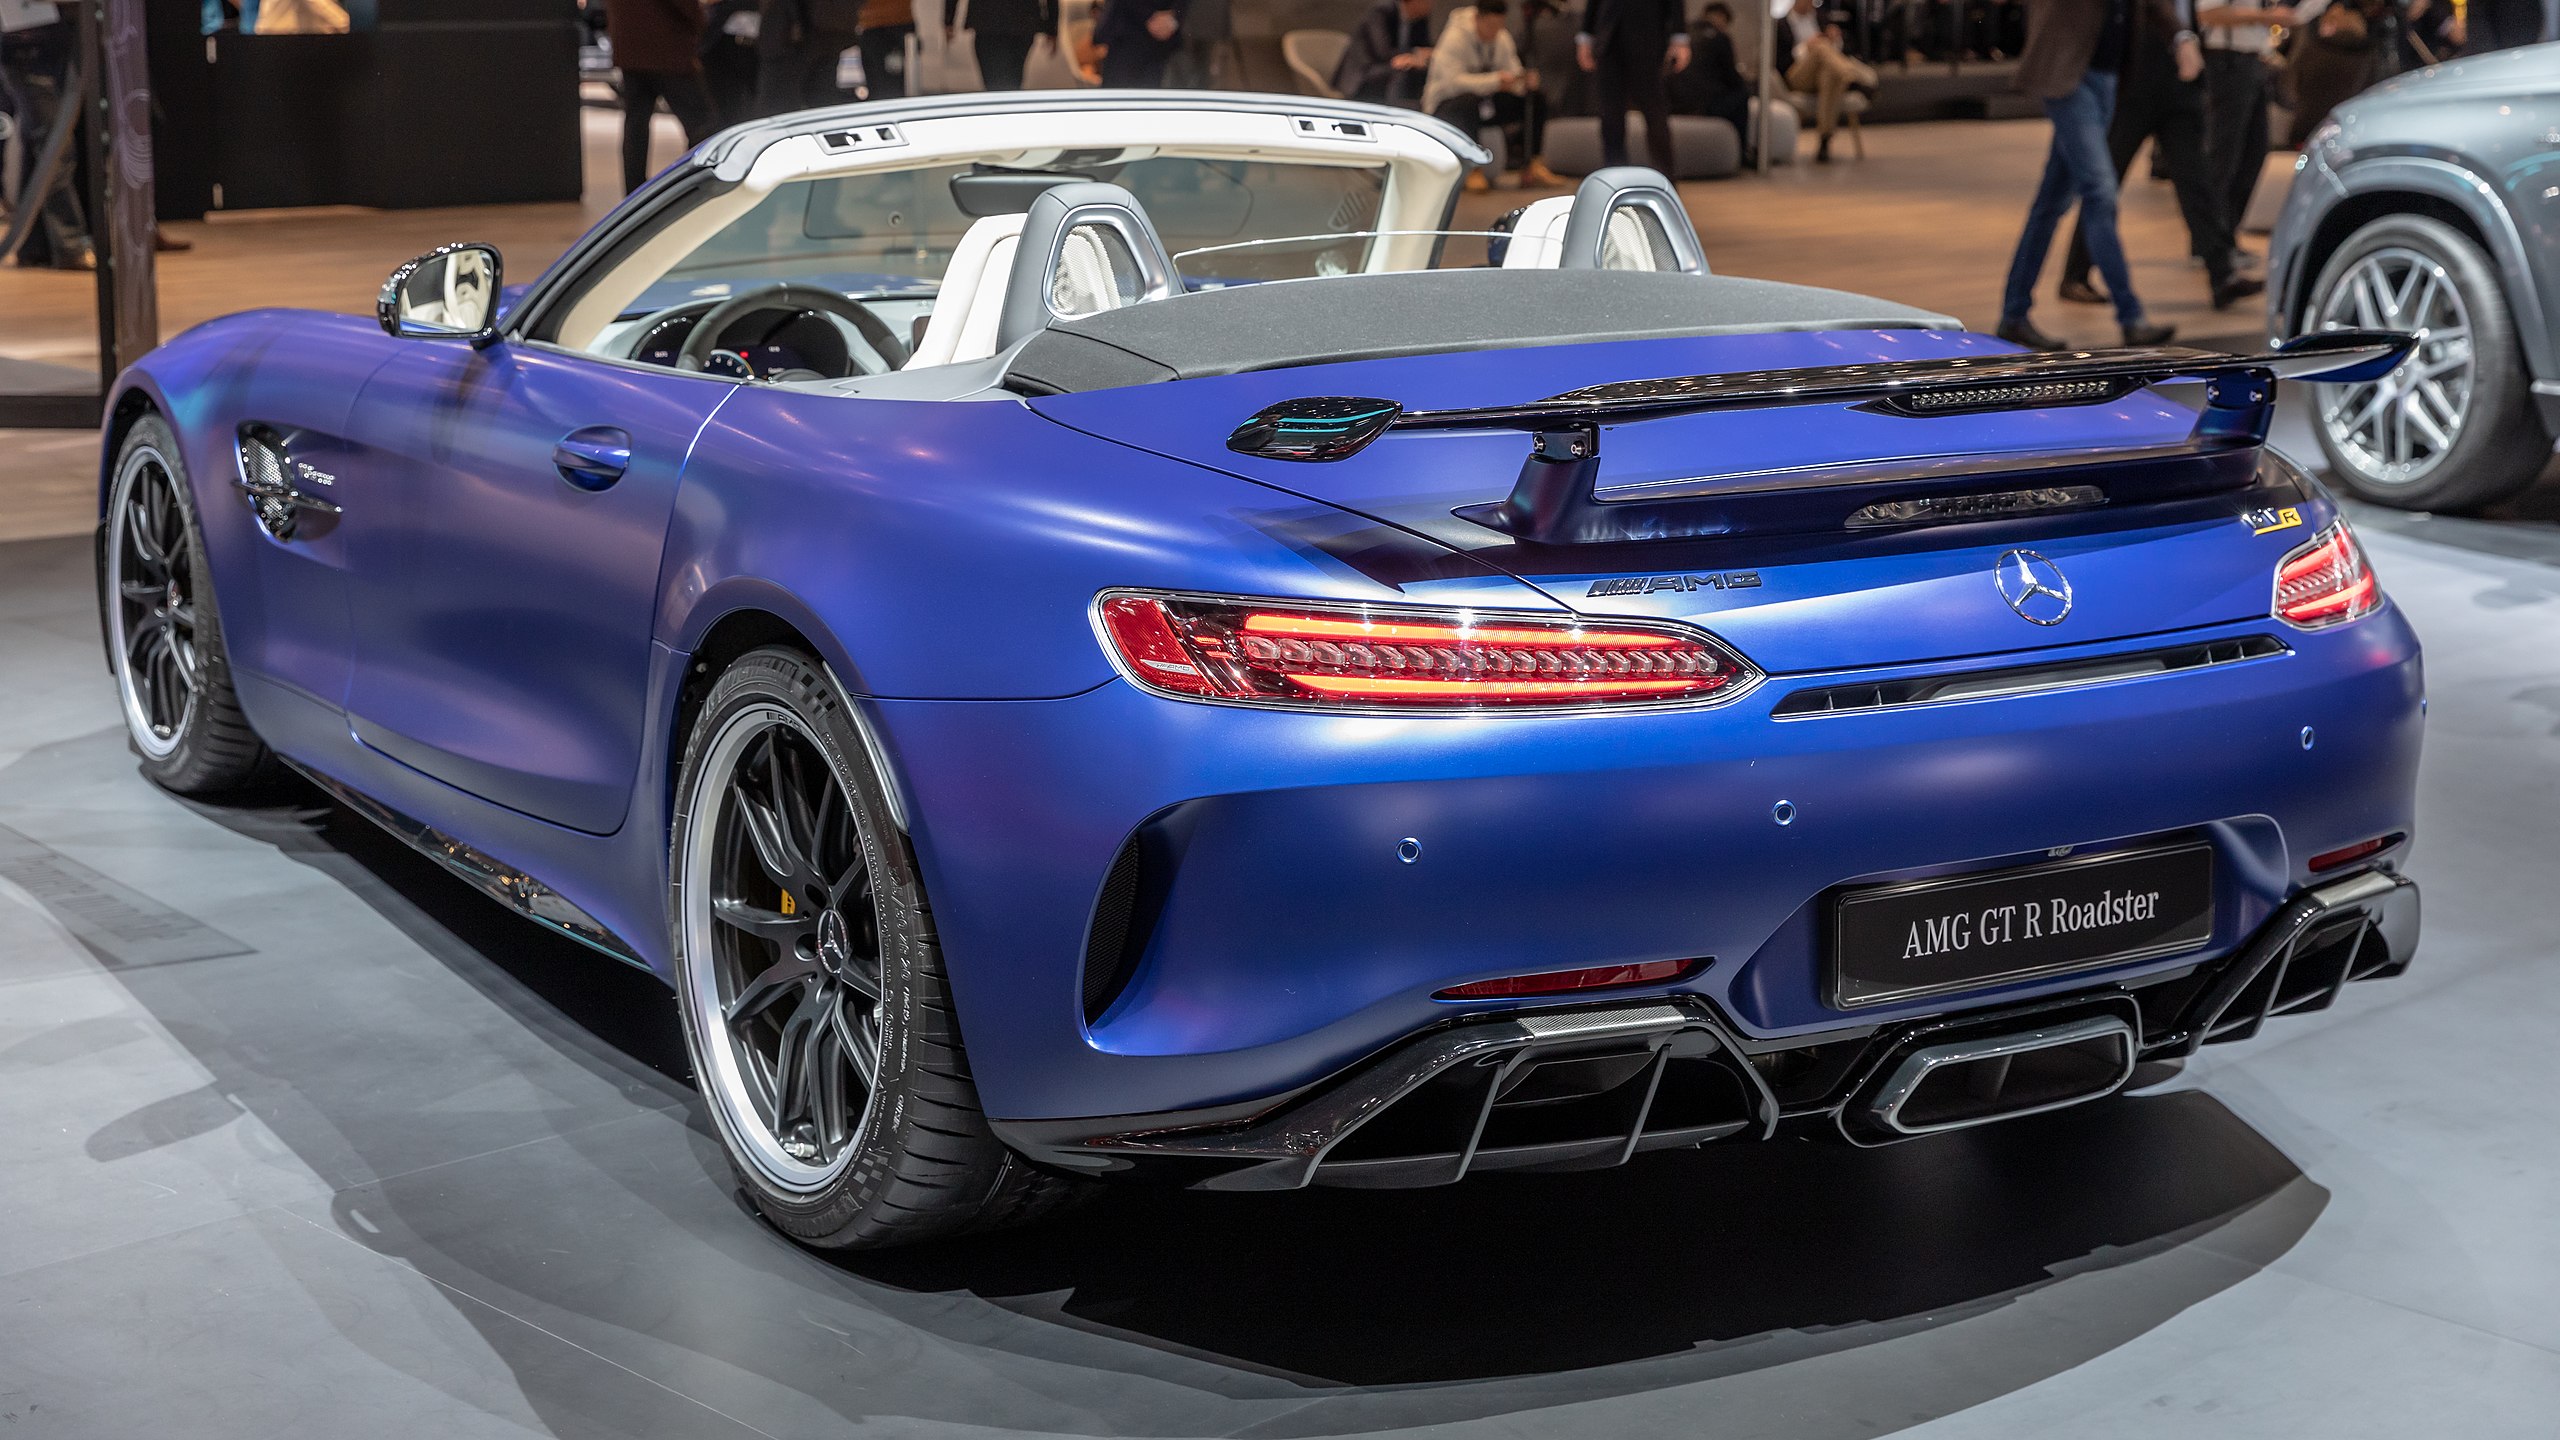 File:Mercedes-AMG GT R Roadster, GIMS 2019, Le Grand-Saconnex  (GIMS0619).jpg - Wikipedia